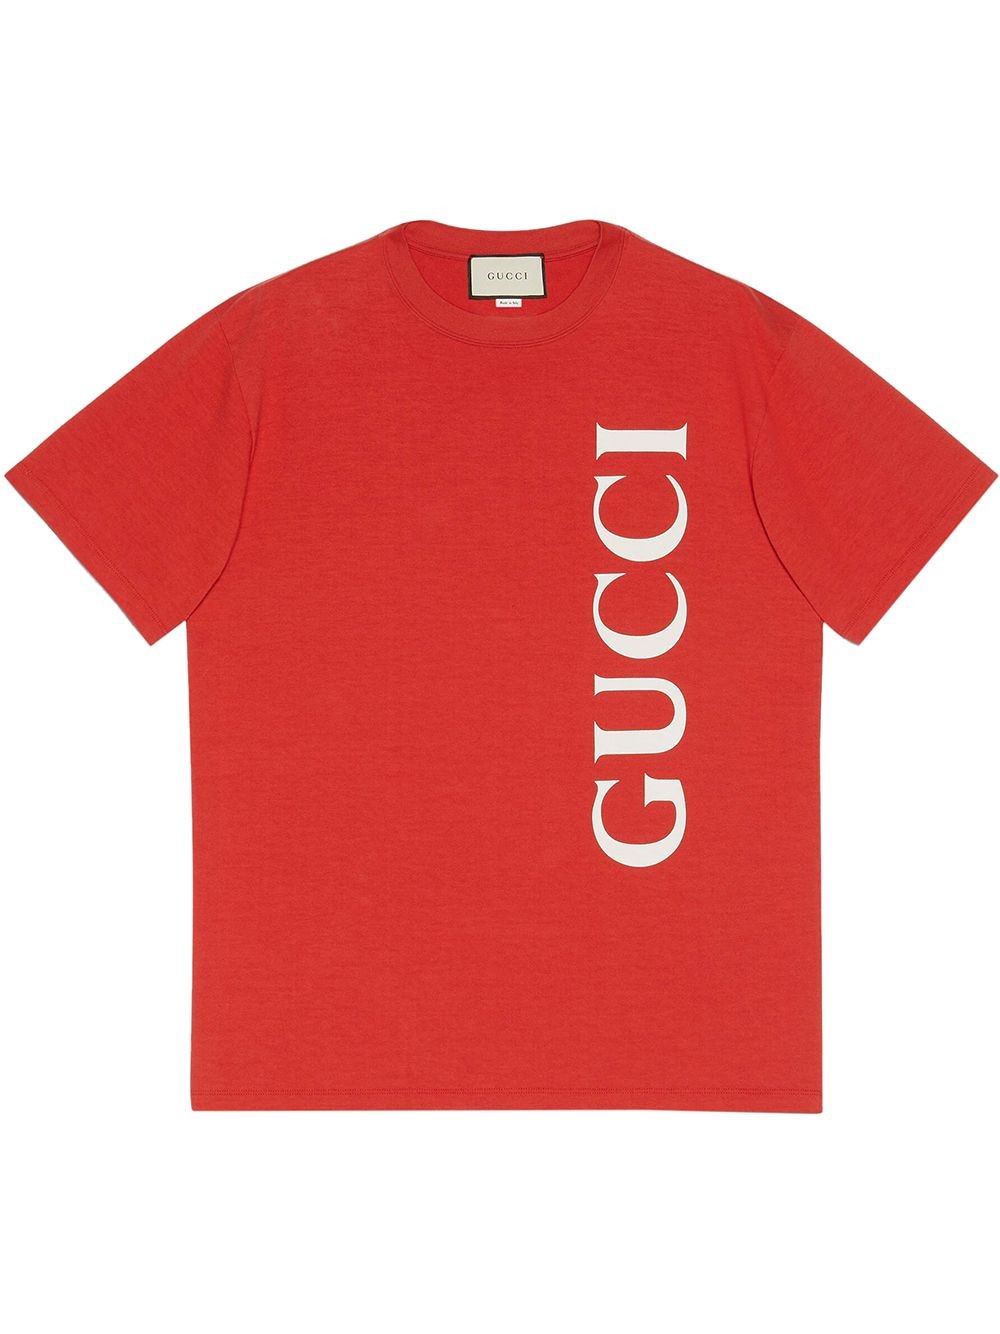 gucci LOGO T-SHIRT available on montiboutique.com - 31798